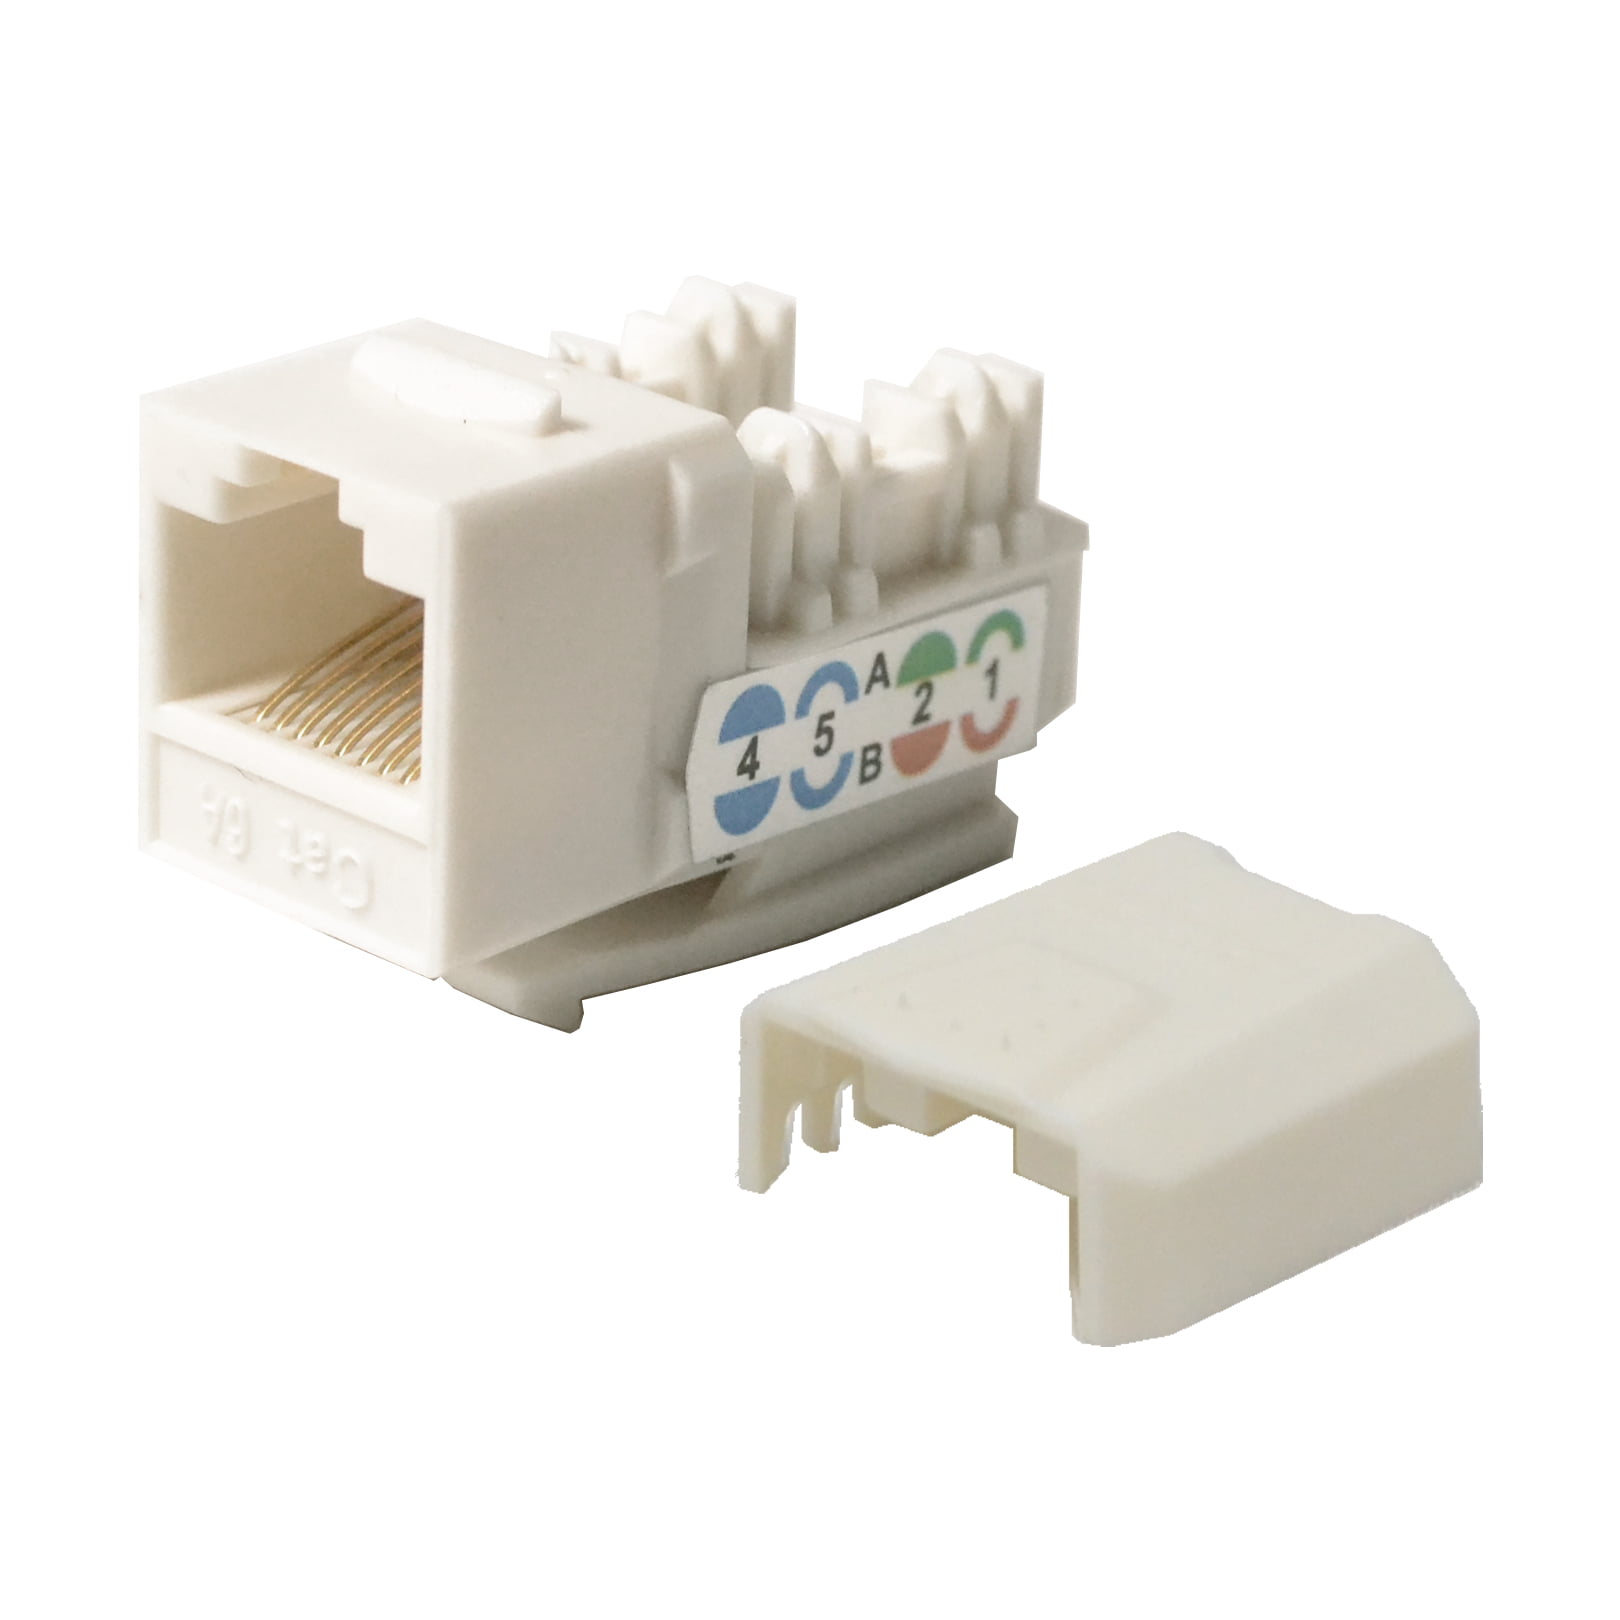 25 Pack Lot White CAT6 Network RJ45 110 Punch Down Keystone Snap-In Jack 